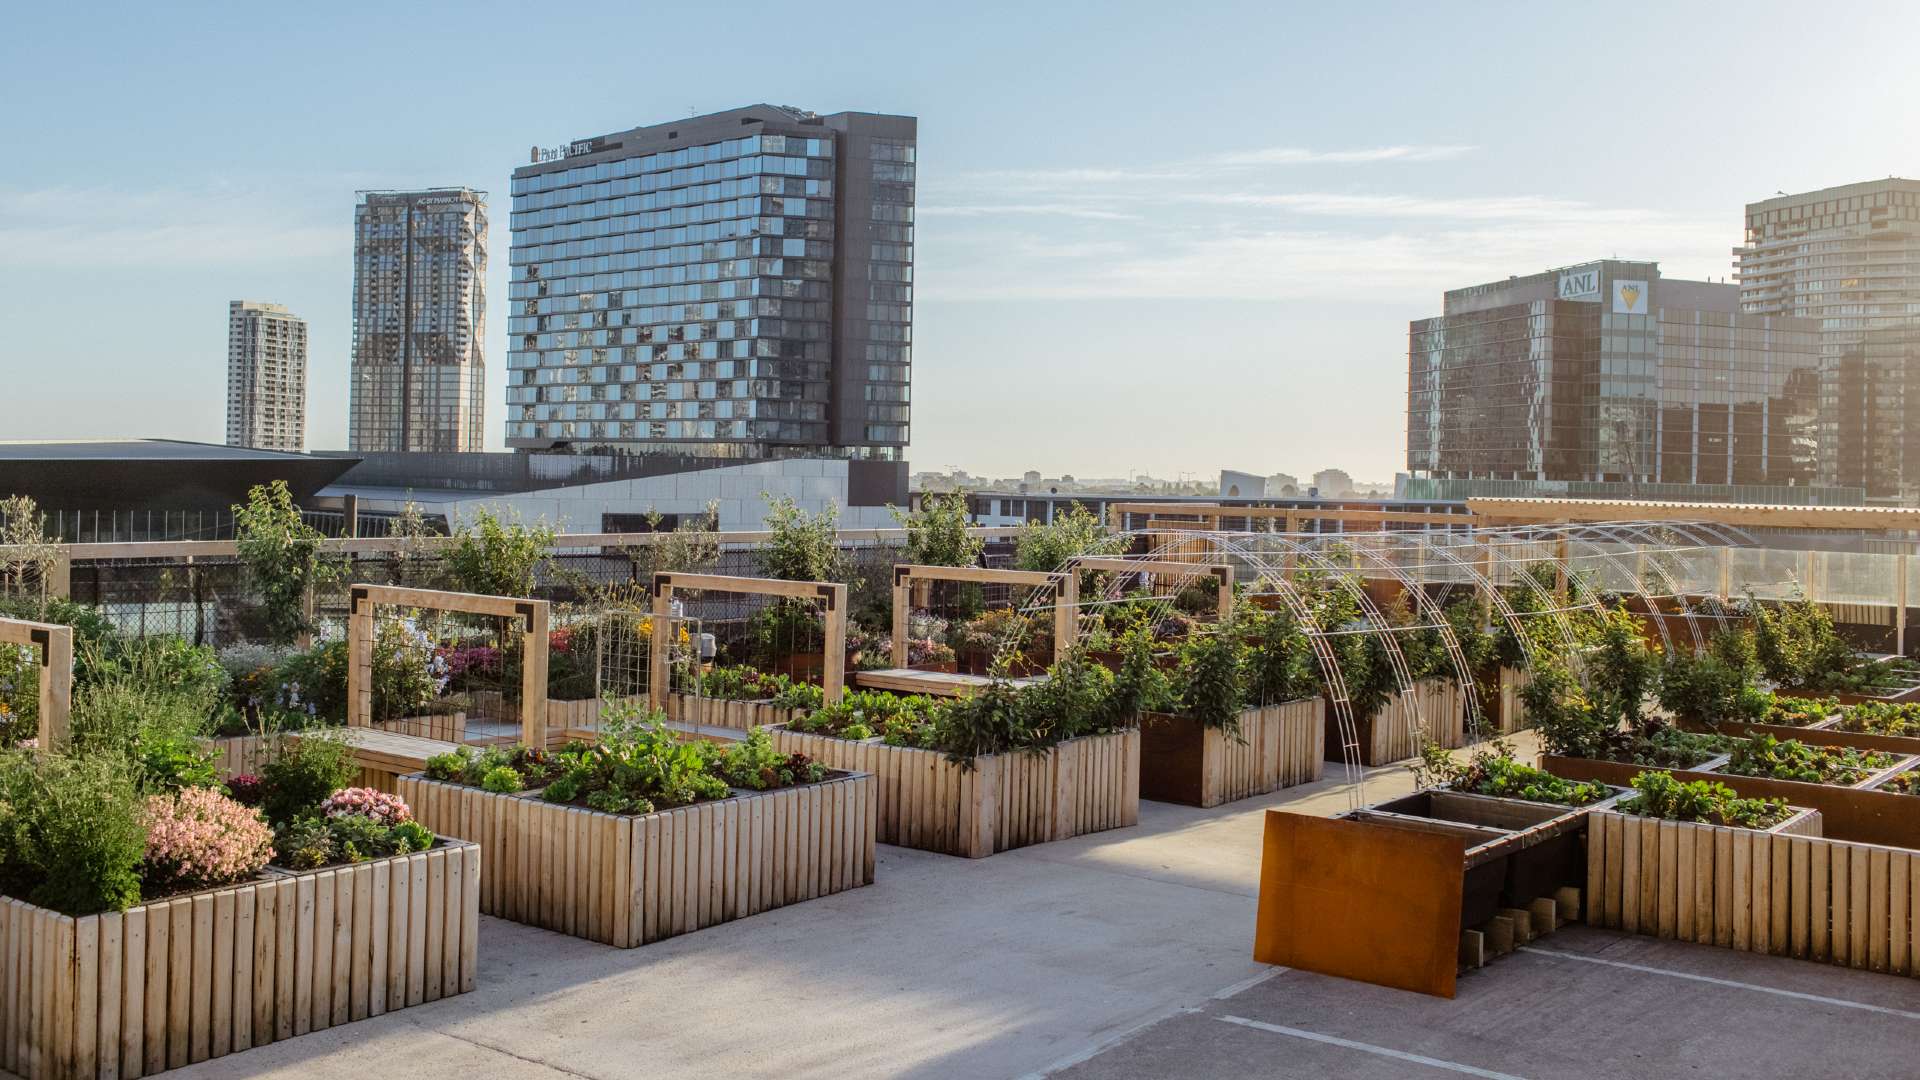 Skyfarm Is the New Urban Farm and Beacon of Sustainability Opening on a CBD Rooftop